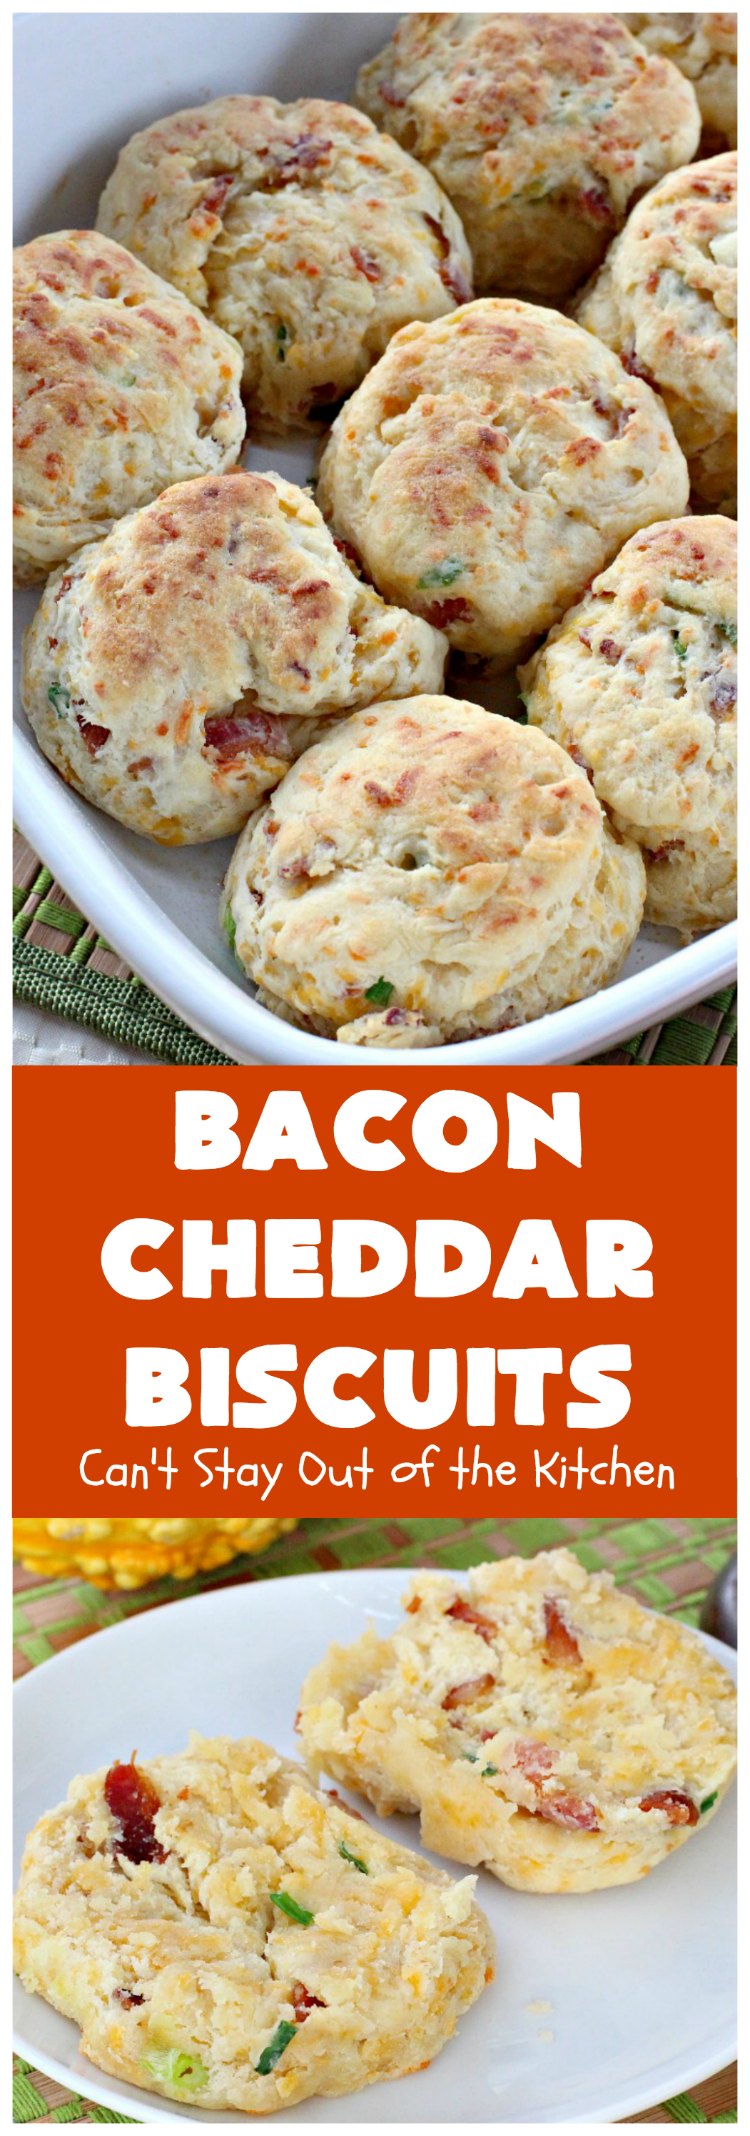 Bacon Cheddar Biscuits | Can't Stay Out of the Kitchen